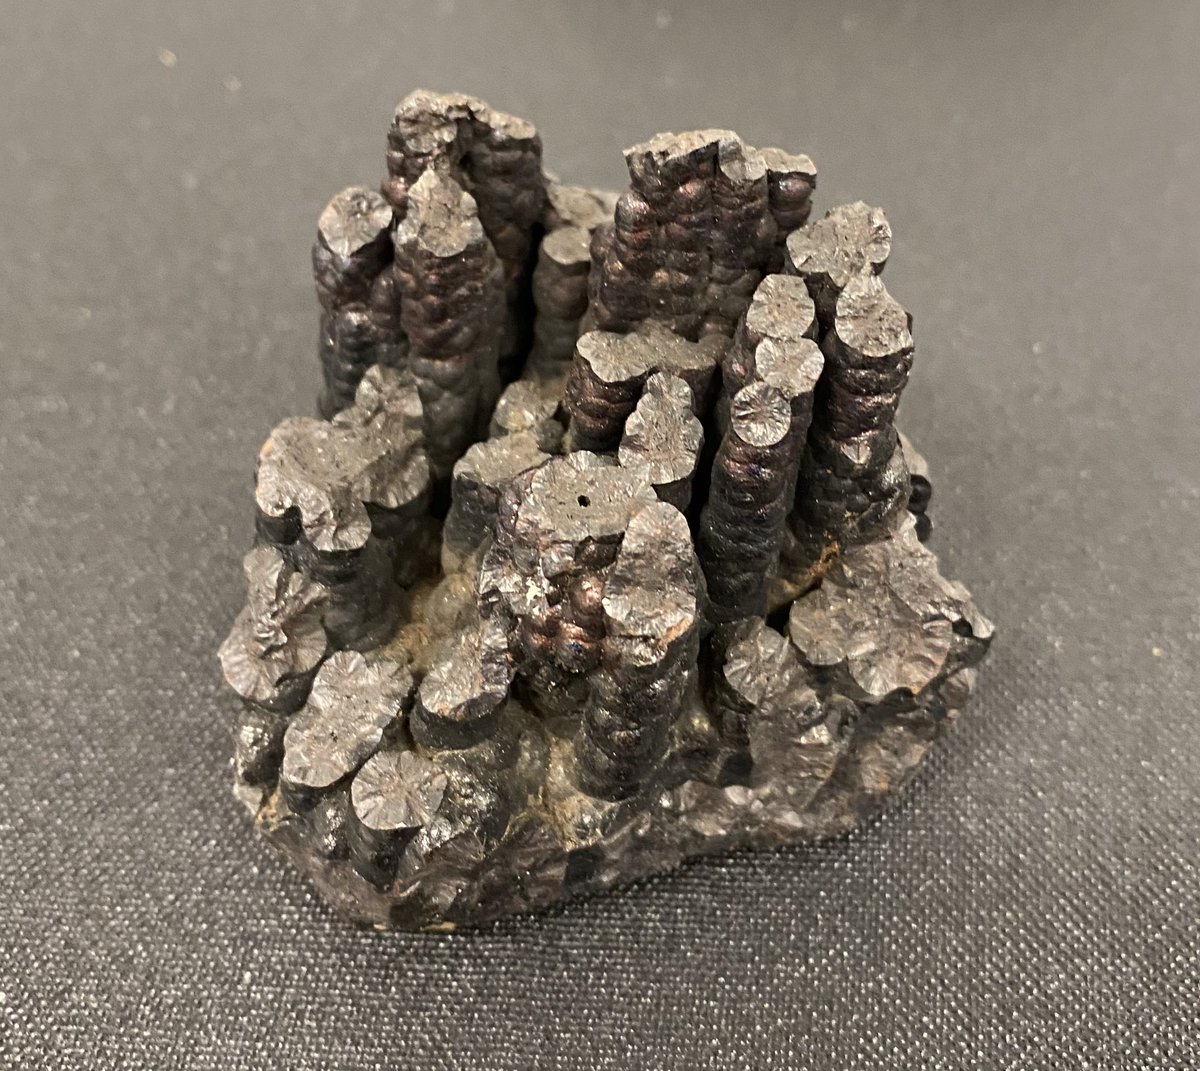 Stalactites of limonite, an iron ore mineraloid that is a mixture of minerals, from Tuscaloosa, Alabama. This one probably has a lot of goethite in it. #MineralMonday #GeoscienceTwitter